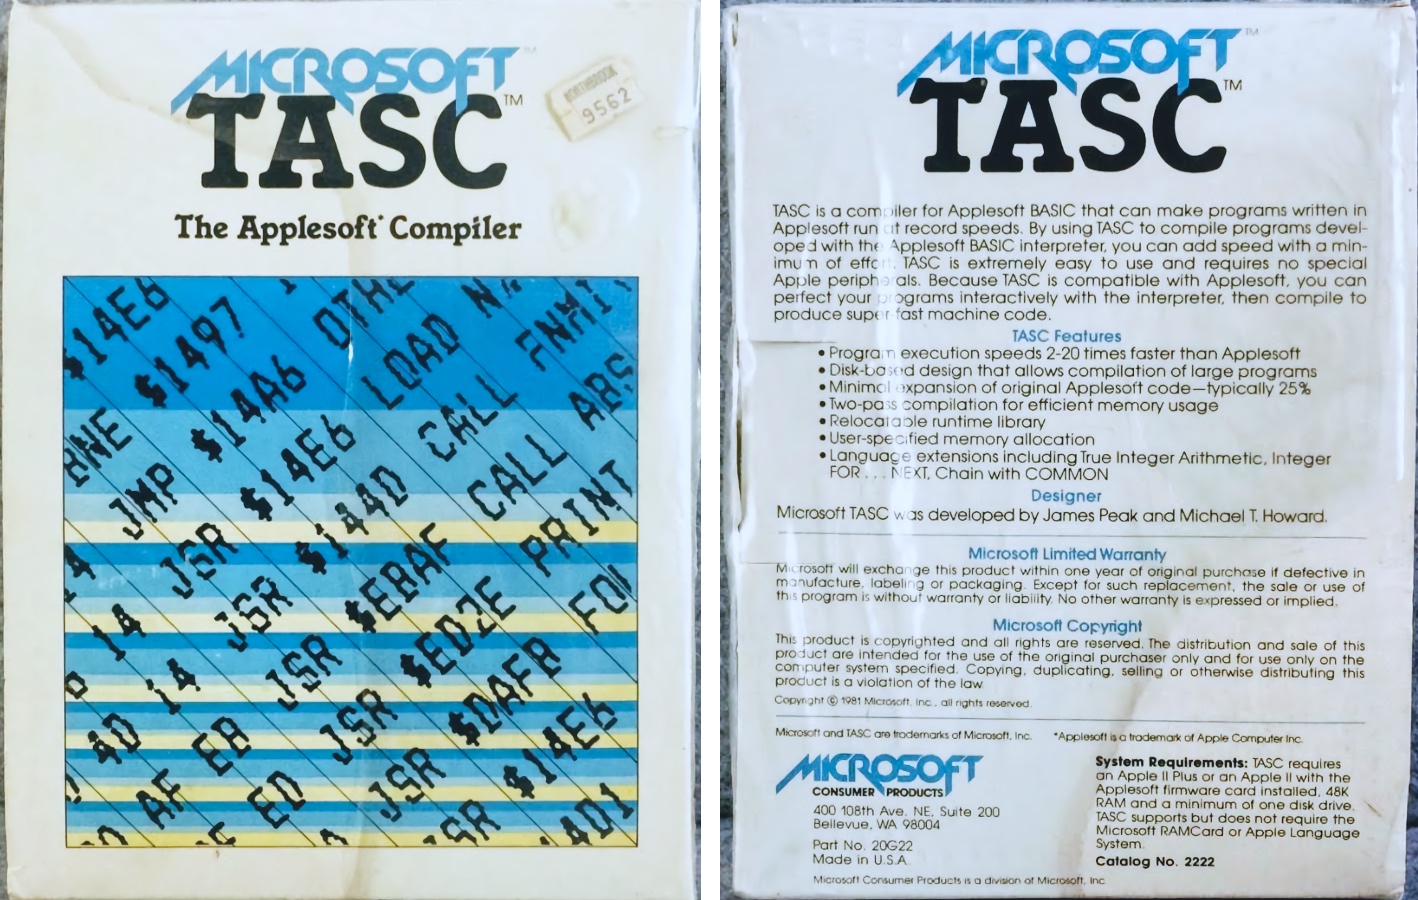 Microsoft TASC Applesoft Compiler Box Front and Back (1991)